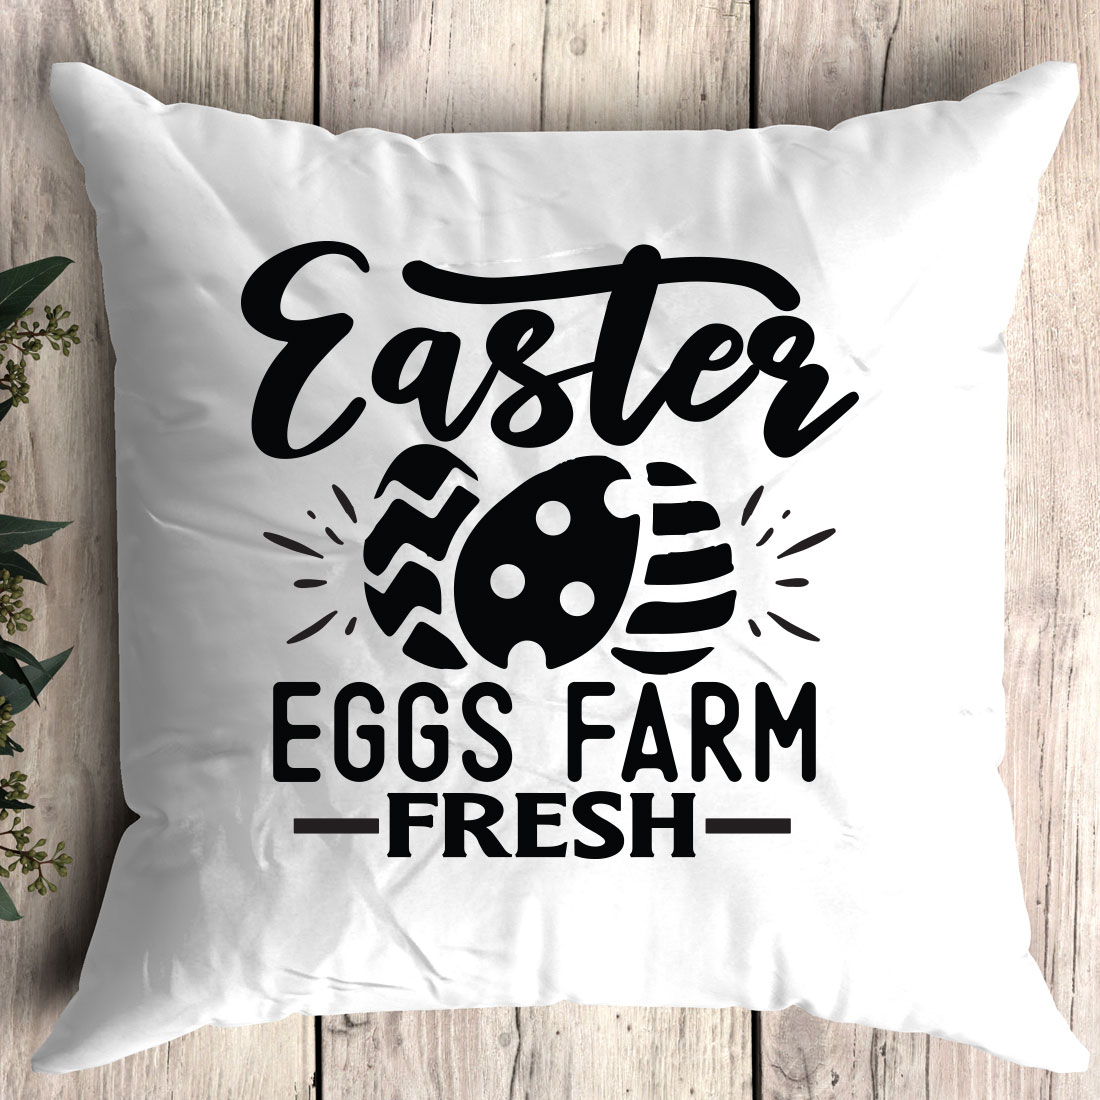 White pillow with the words easter egg farm fresh on it.